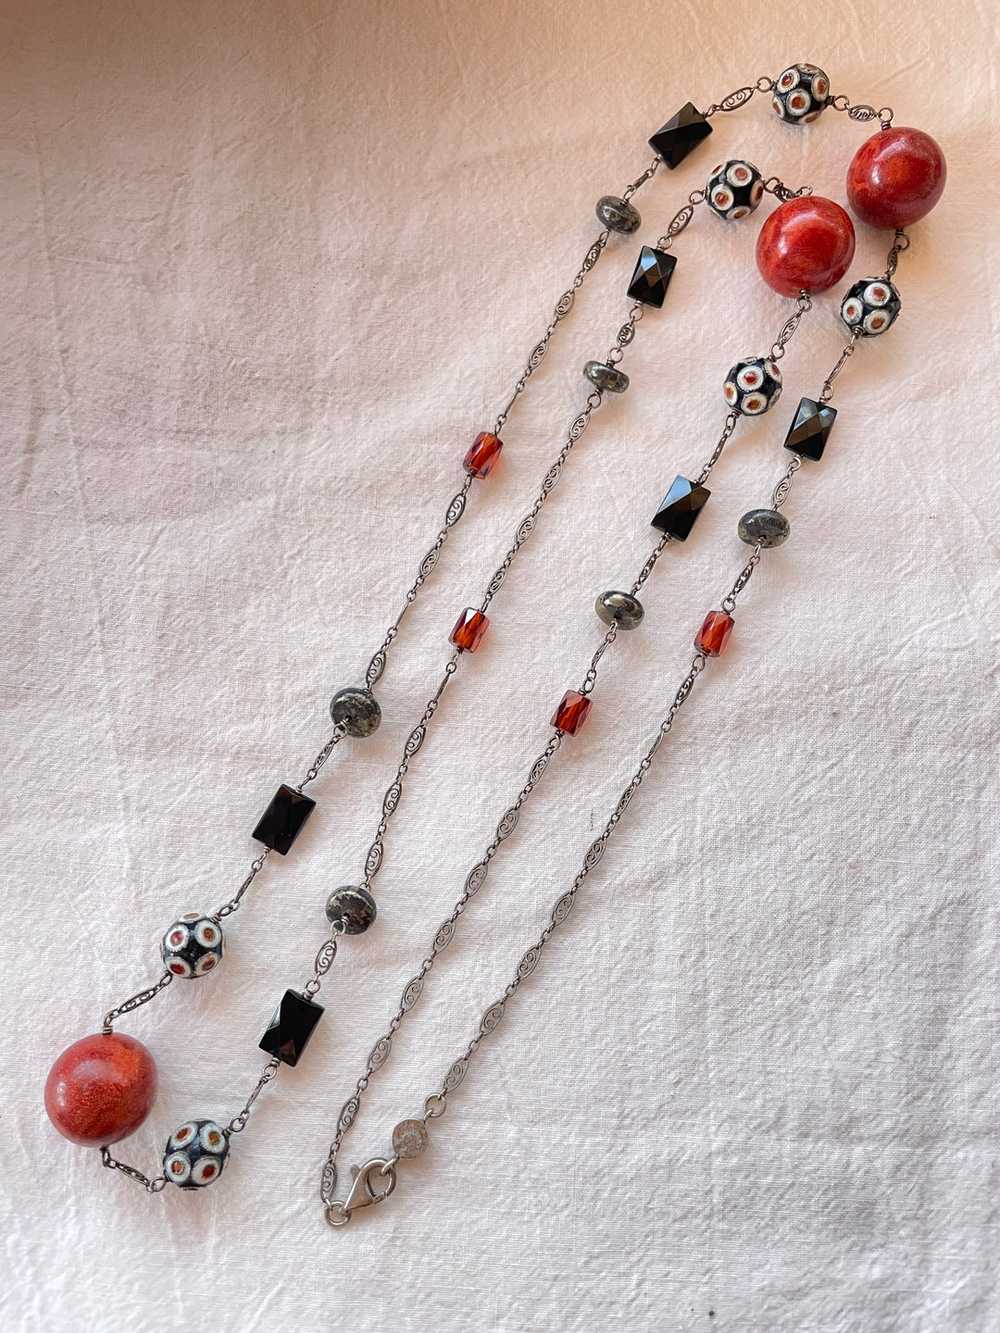 Liza Shtromberg Silver, Onyx and Cinnabar Necklace - image 5